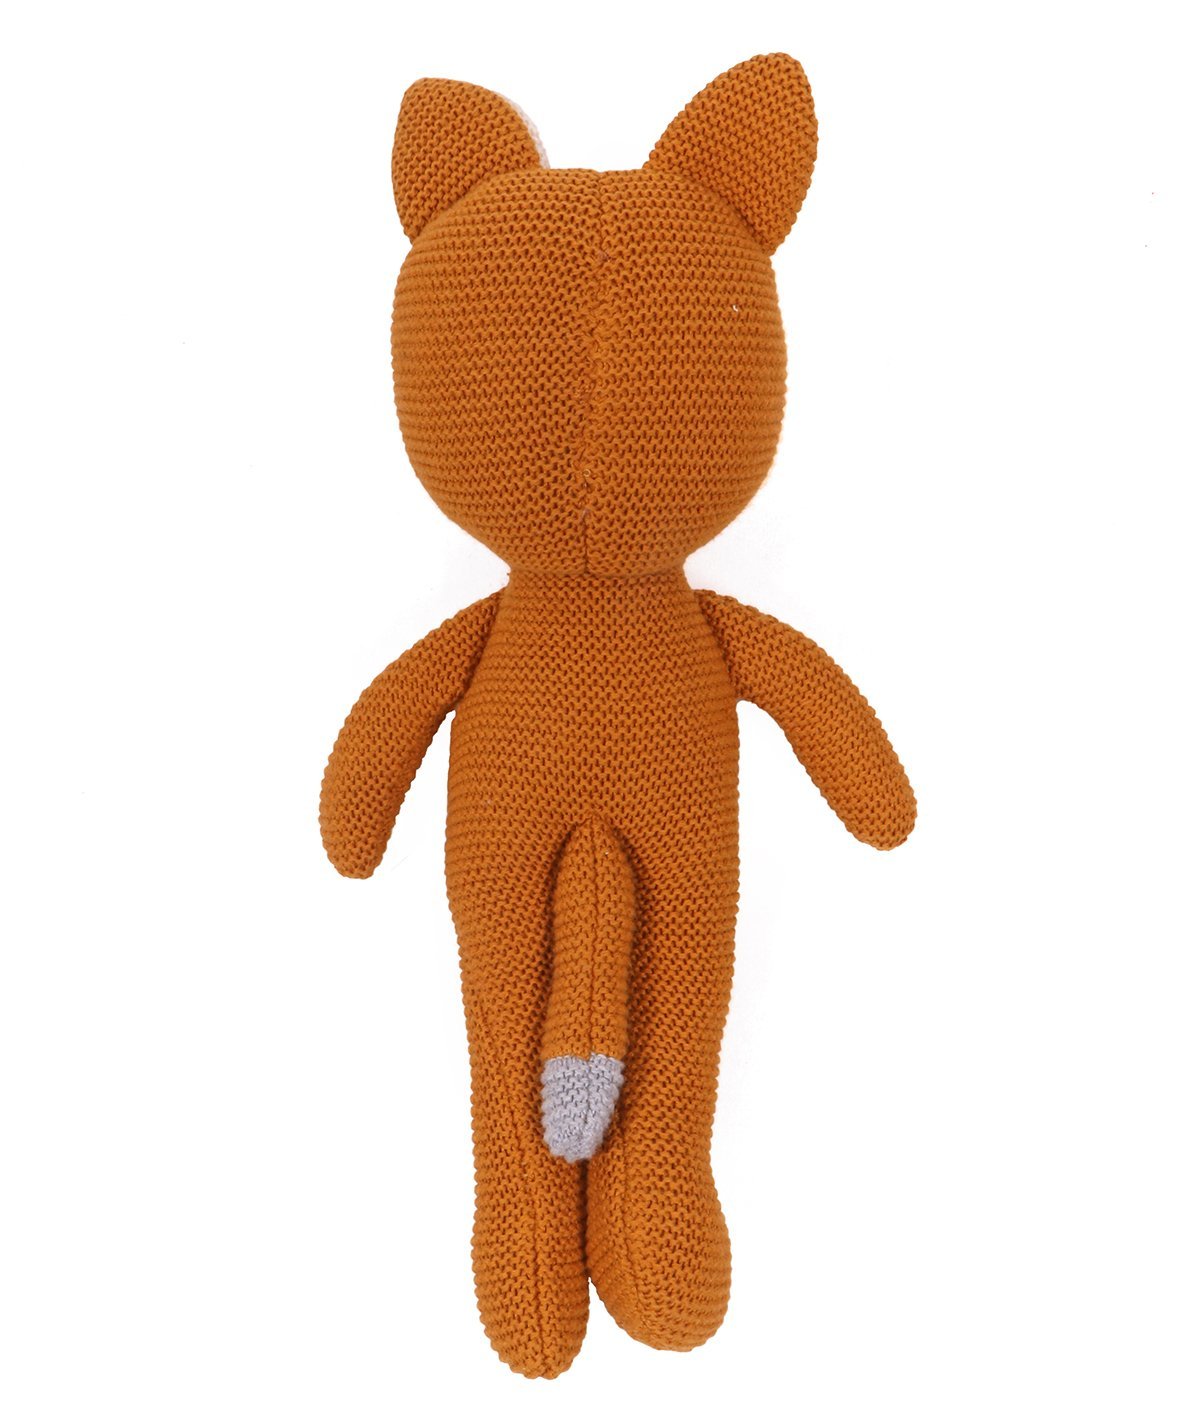 Jolly fox Mustard & Natural 100% Cotton Knitted Stuffed Soft Toy for Babies / Kids